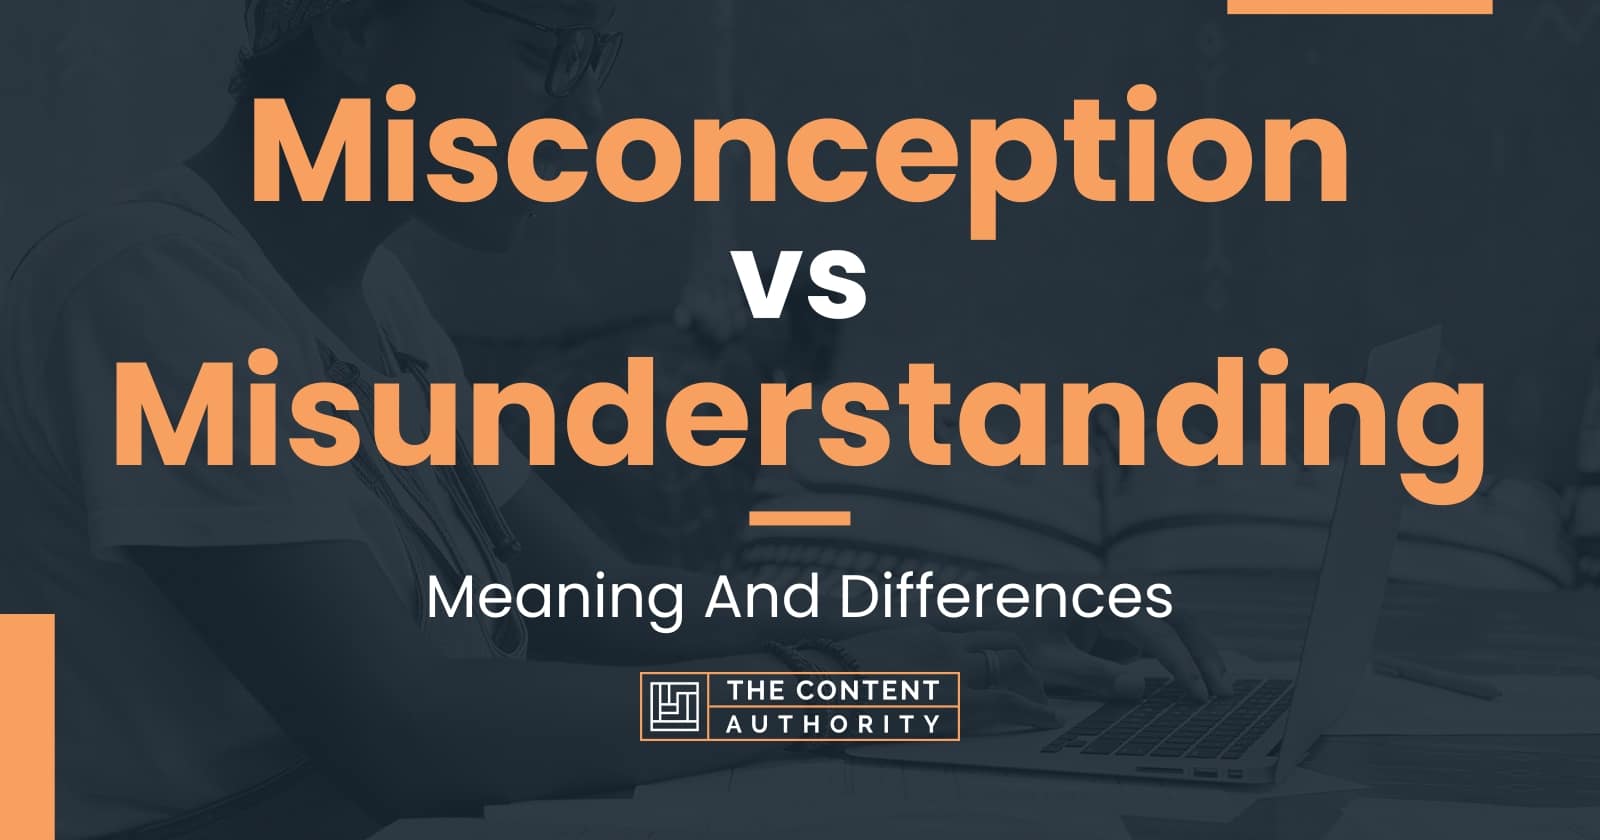 Misconception vs Misunderstanding Meaning And Differences